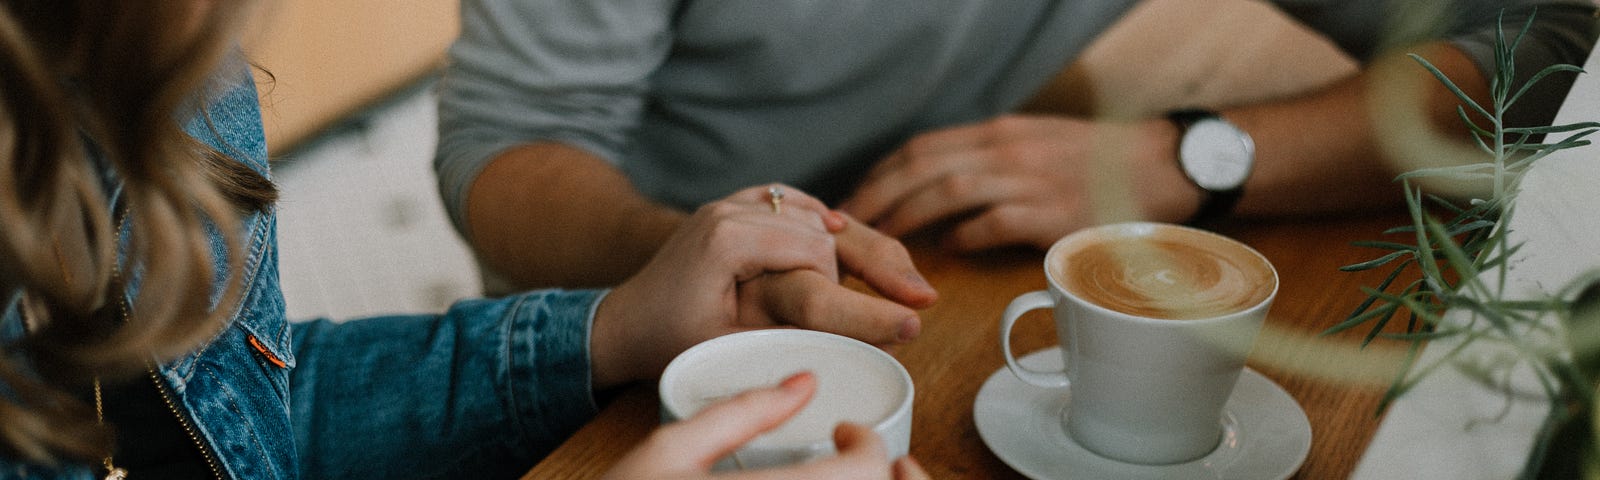 Photo of man and woman drinking coffee and holding hands.